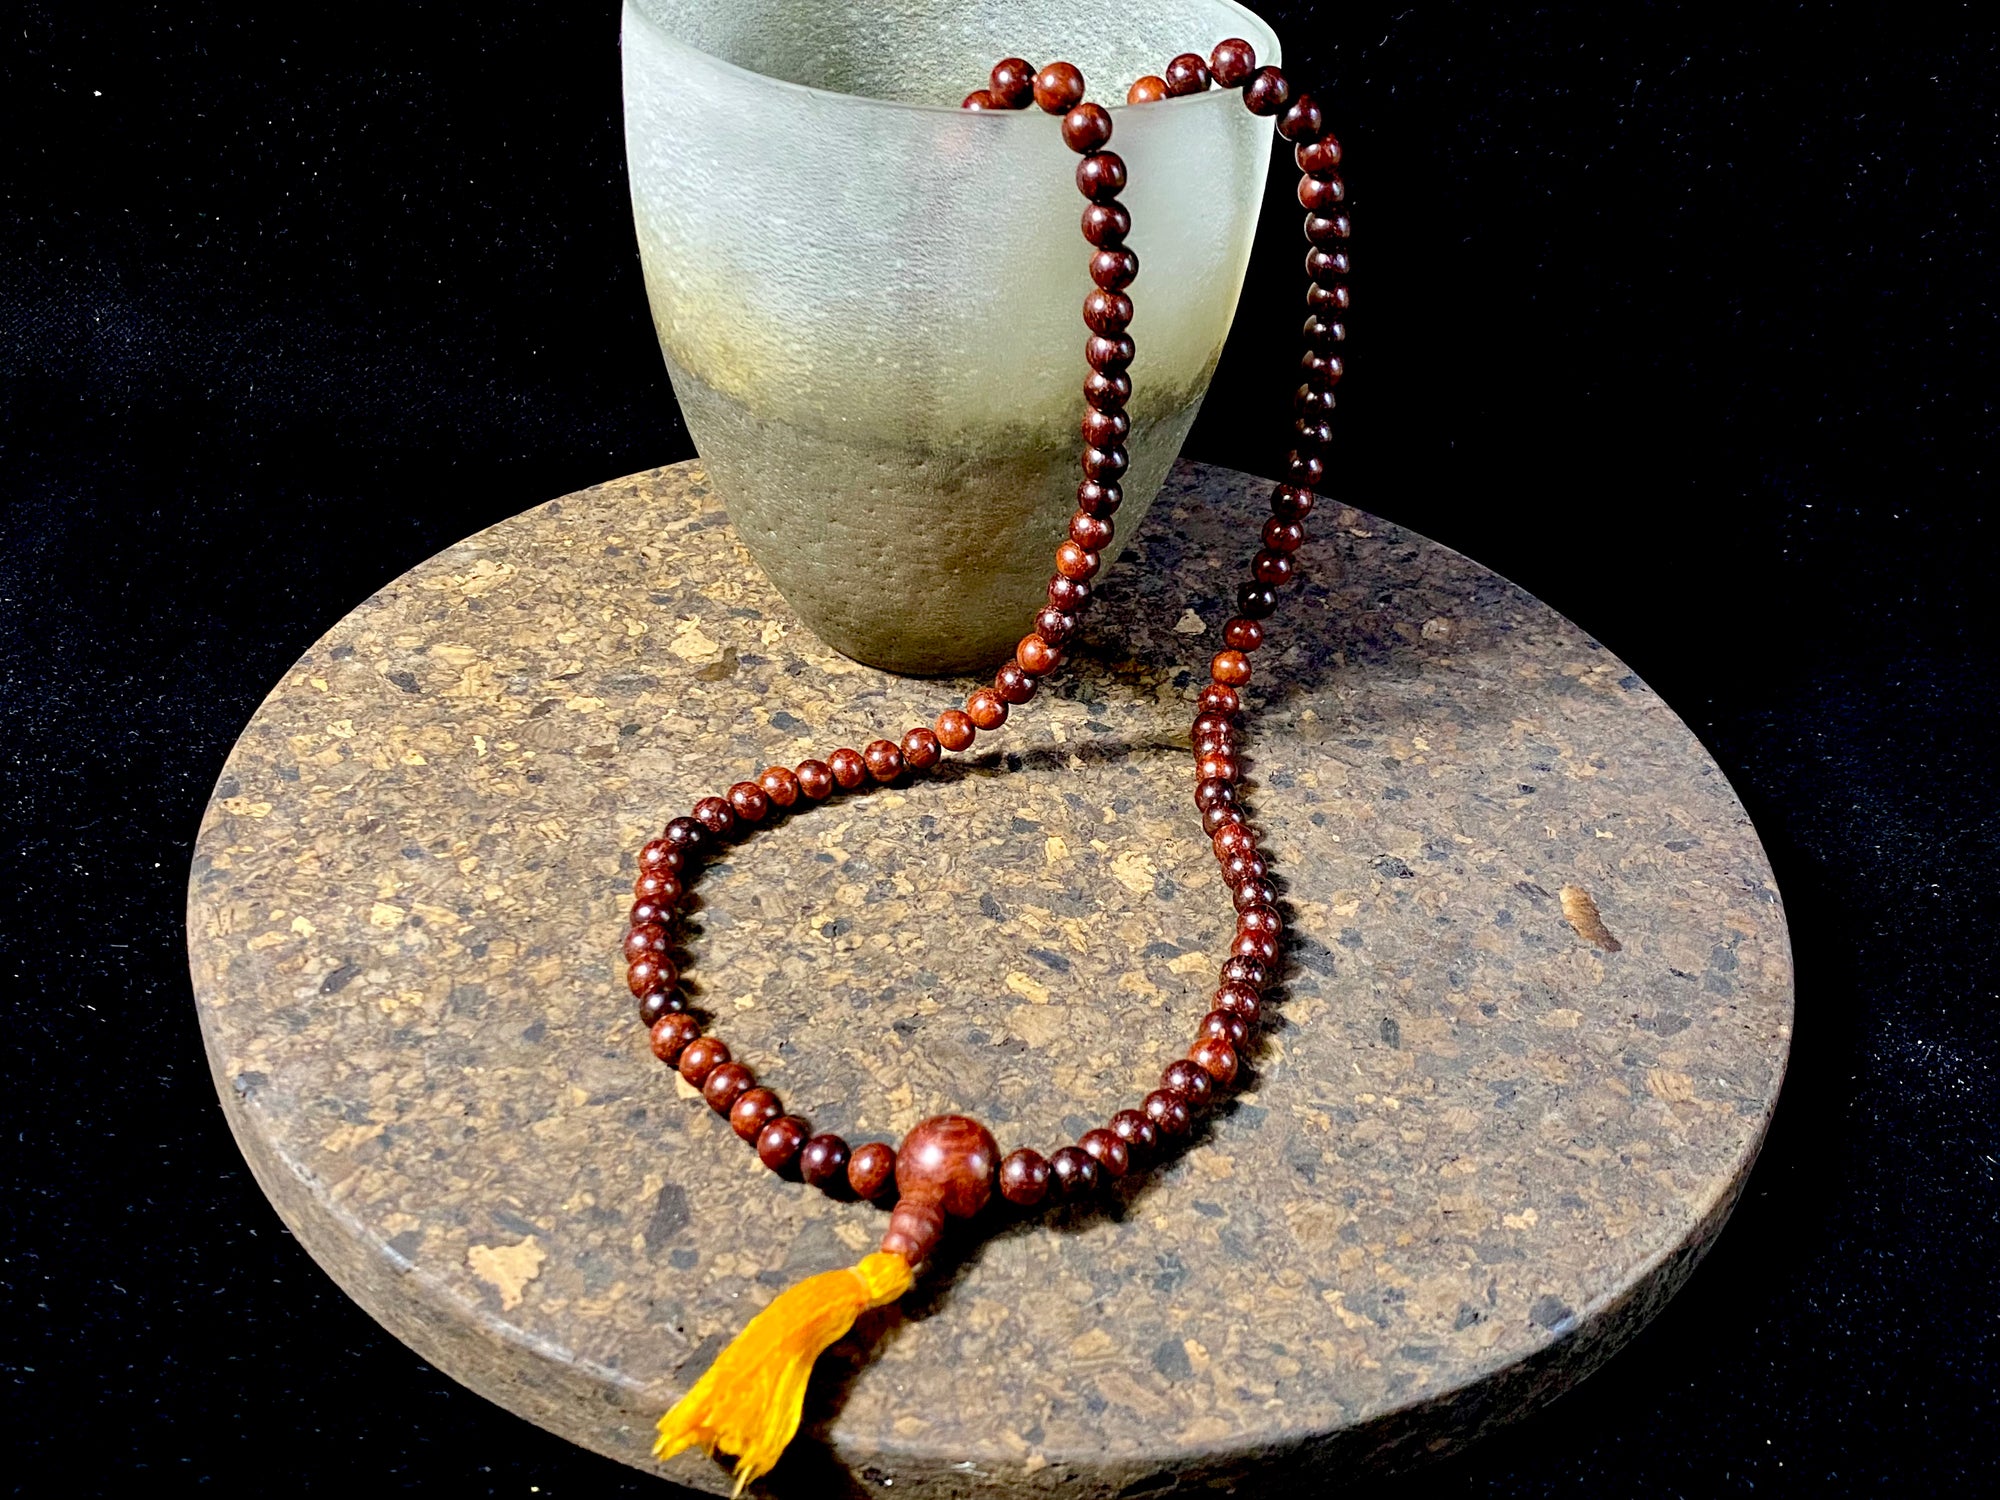 Women or men’s mala necklace, made from natural, dark sandalwood. This beautiful mala is exceptionally well made and has a pleasing lustre, weight and feel in the hand. As per a standard Buddhist mala, it contains 108 beads. From India